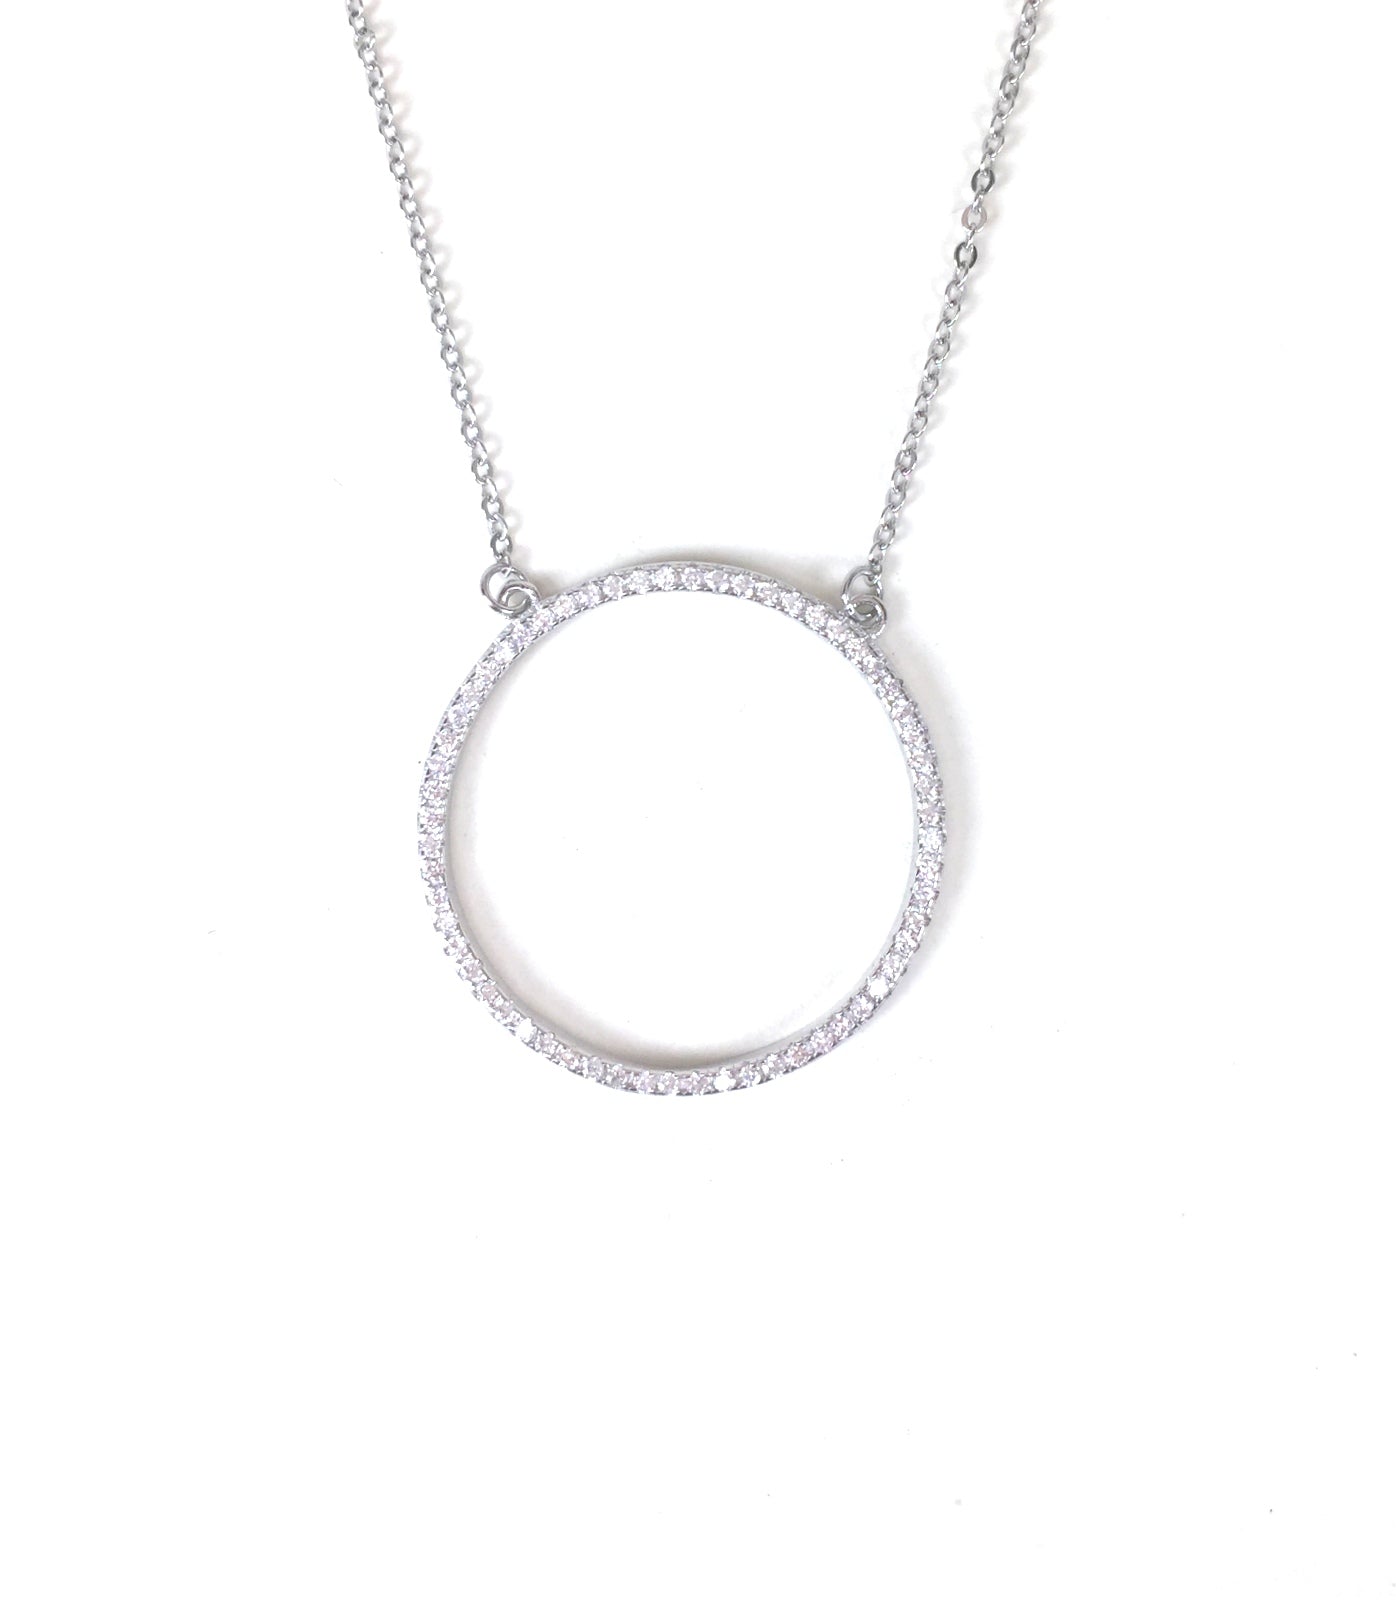 BIG CIRCLE PAVE CZ STERLING SILVER NECKLACE